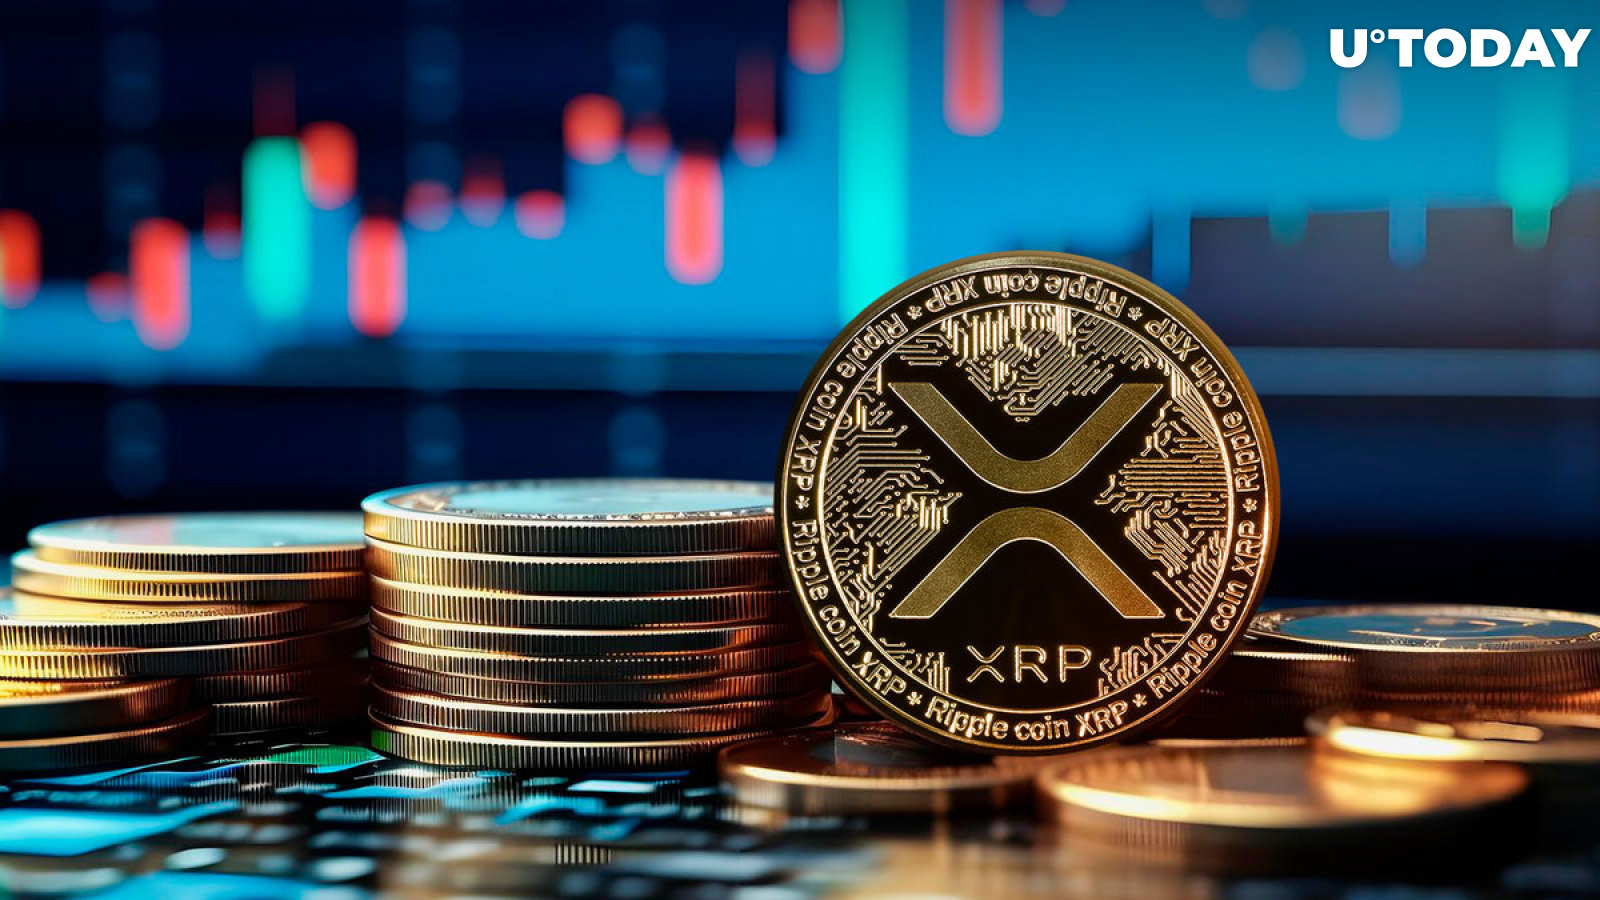 This XRP Metric Surges to $10 Billion and Can Affect Price Greatly